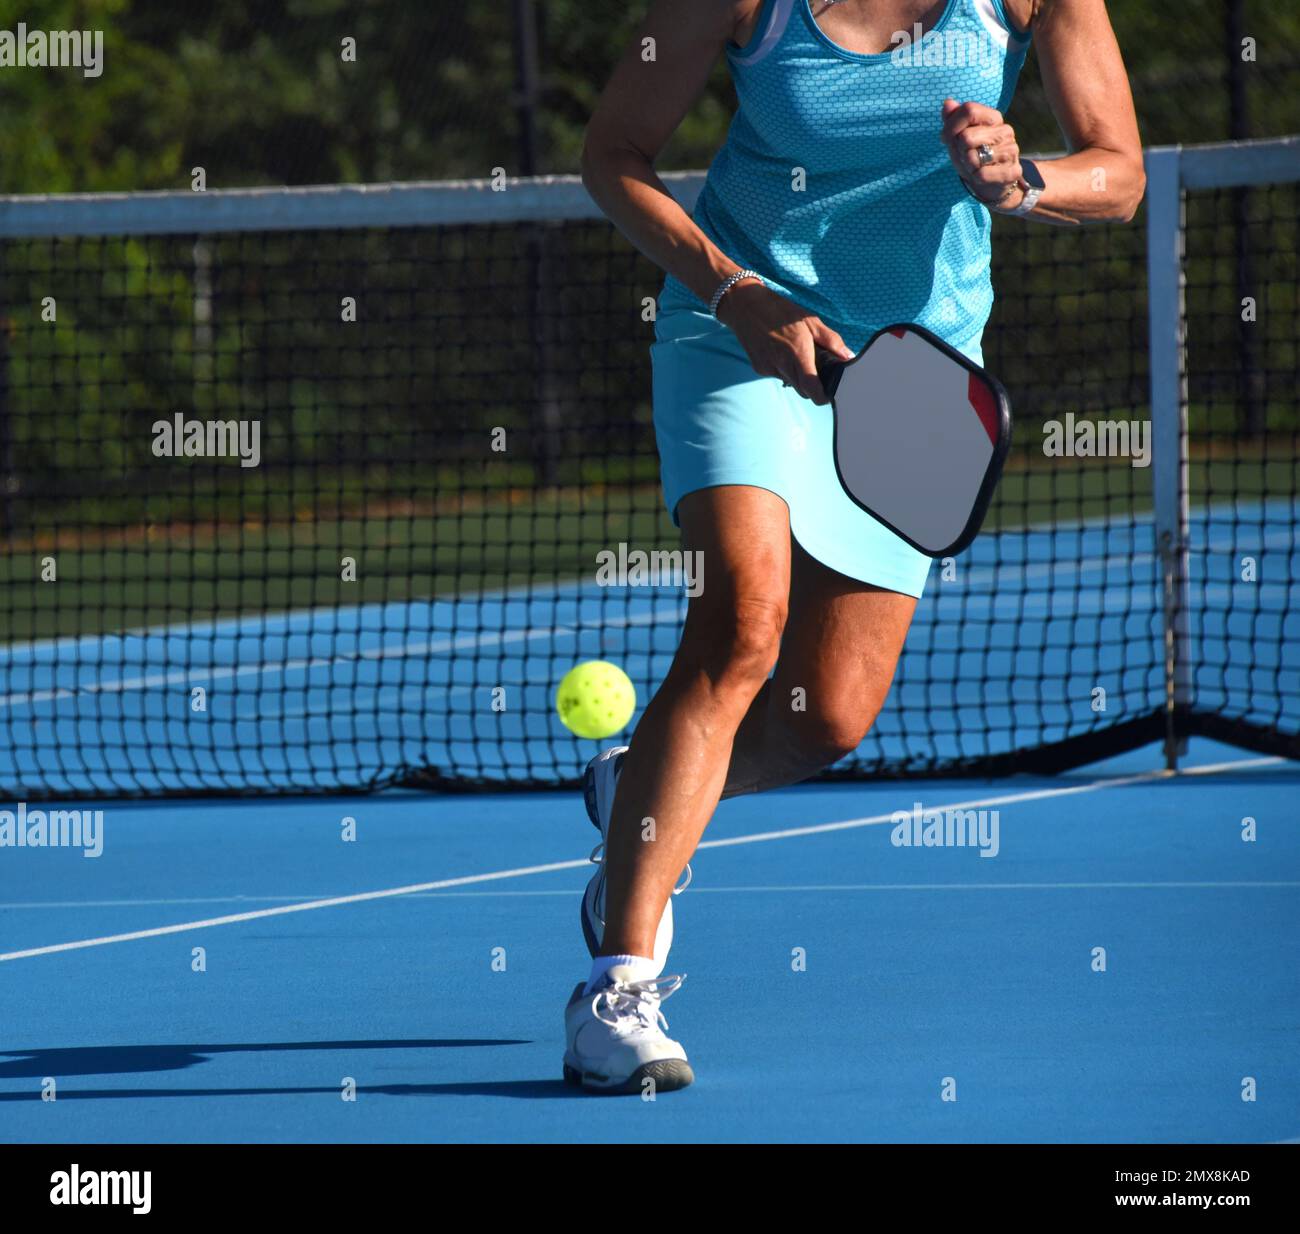 Senior pickle ball player races to intercept a yellow pickle ball.  She is female and wearing a colorful turquoise tennis outfit. Stock Photo